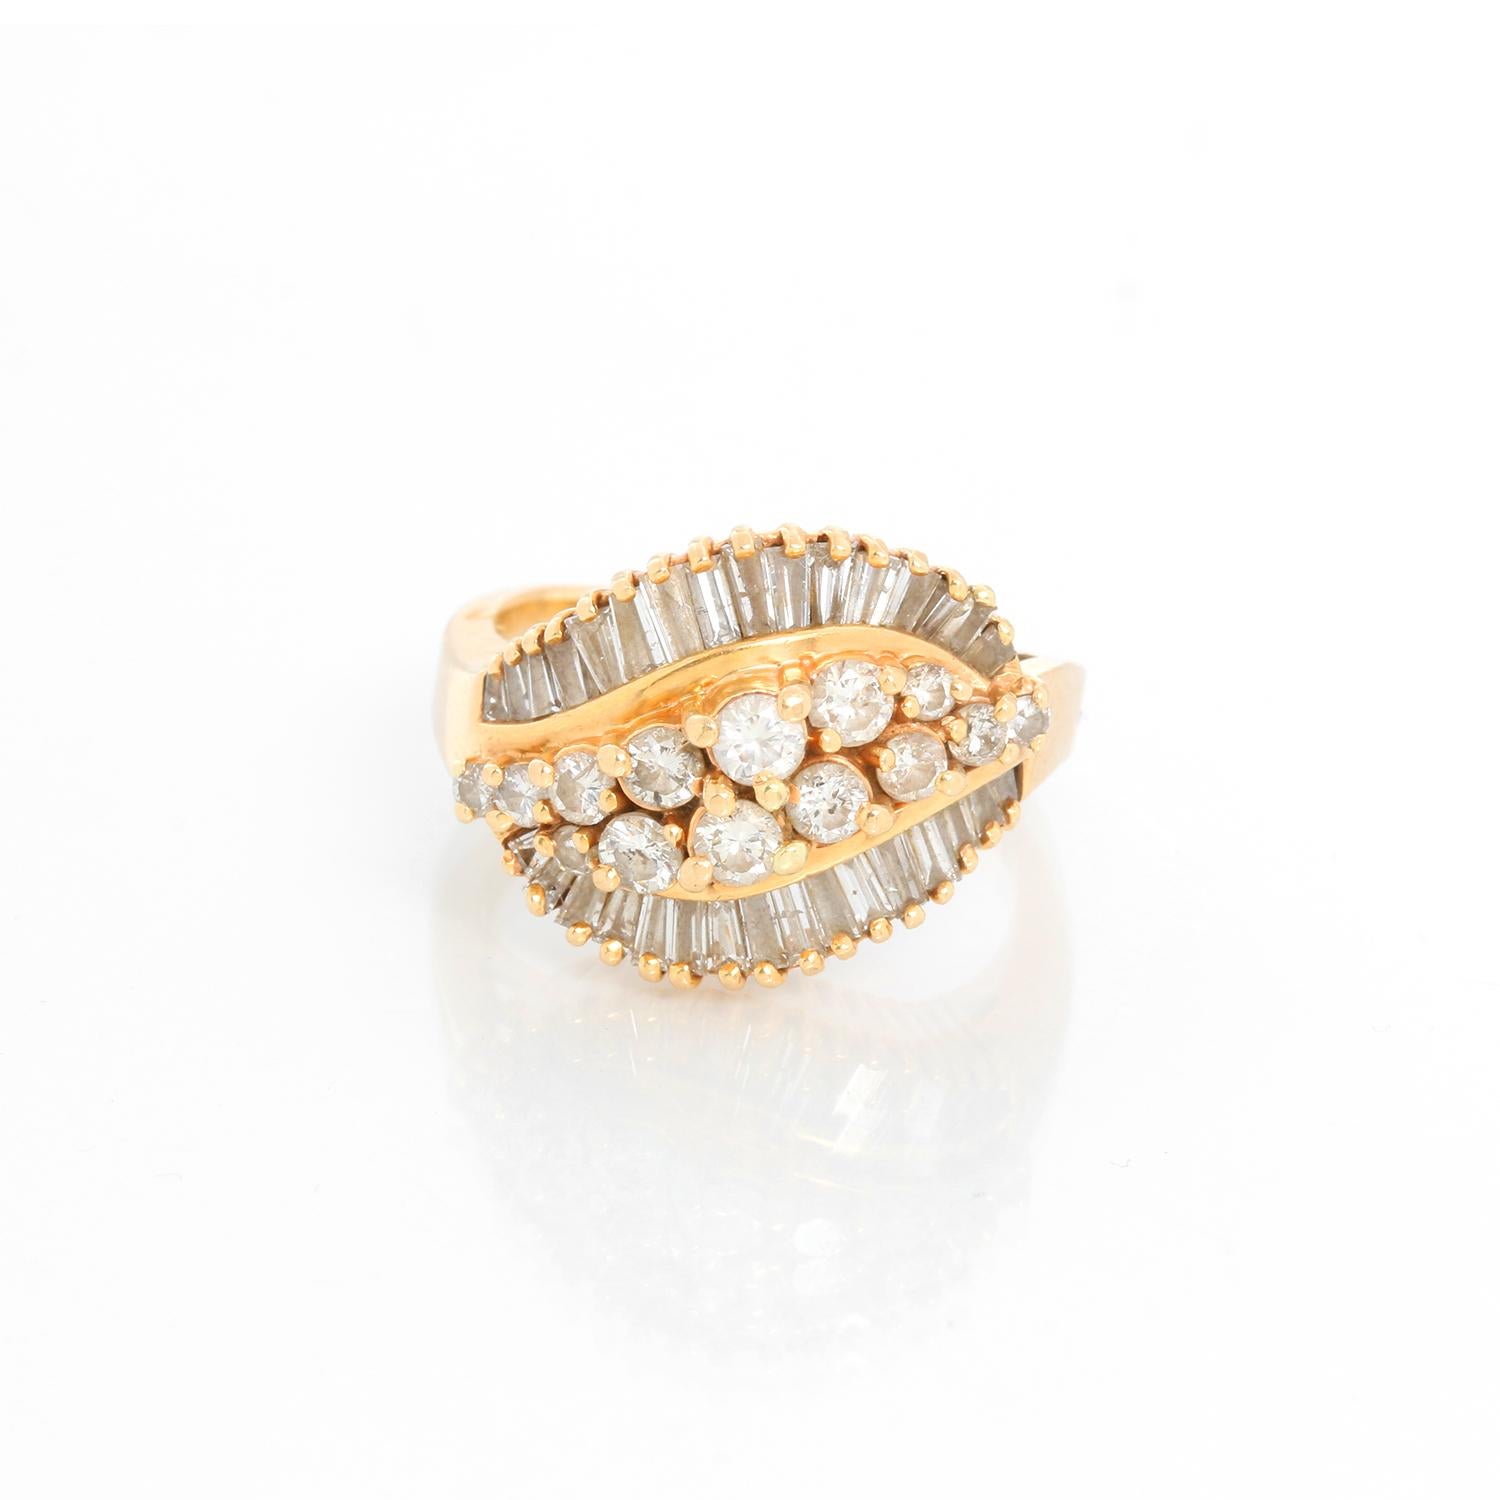 Vintage 14K Yellow Gold & Diamond Ring - Baguette cut diamonds and round brilliant diamonds set in 14 K Yellow gold. Weighing approx. 1.25 cts. Size 7 1/4. Pre-owned with custom box .